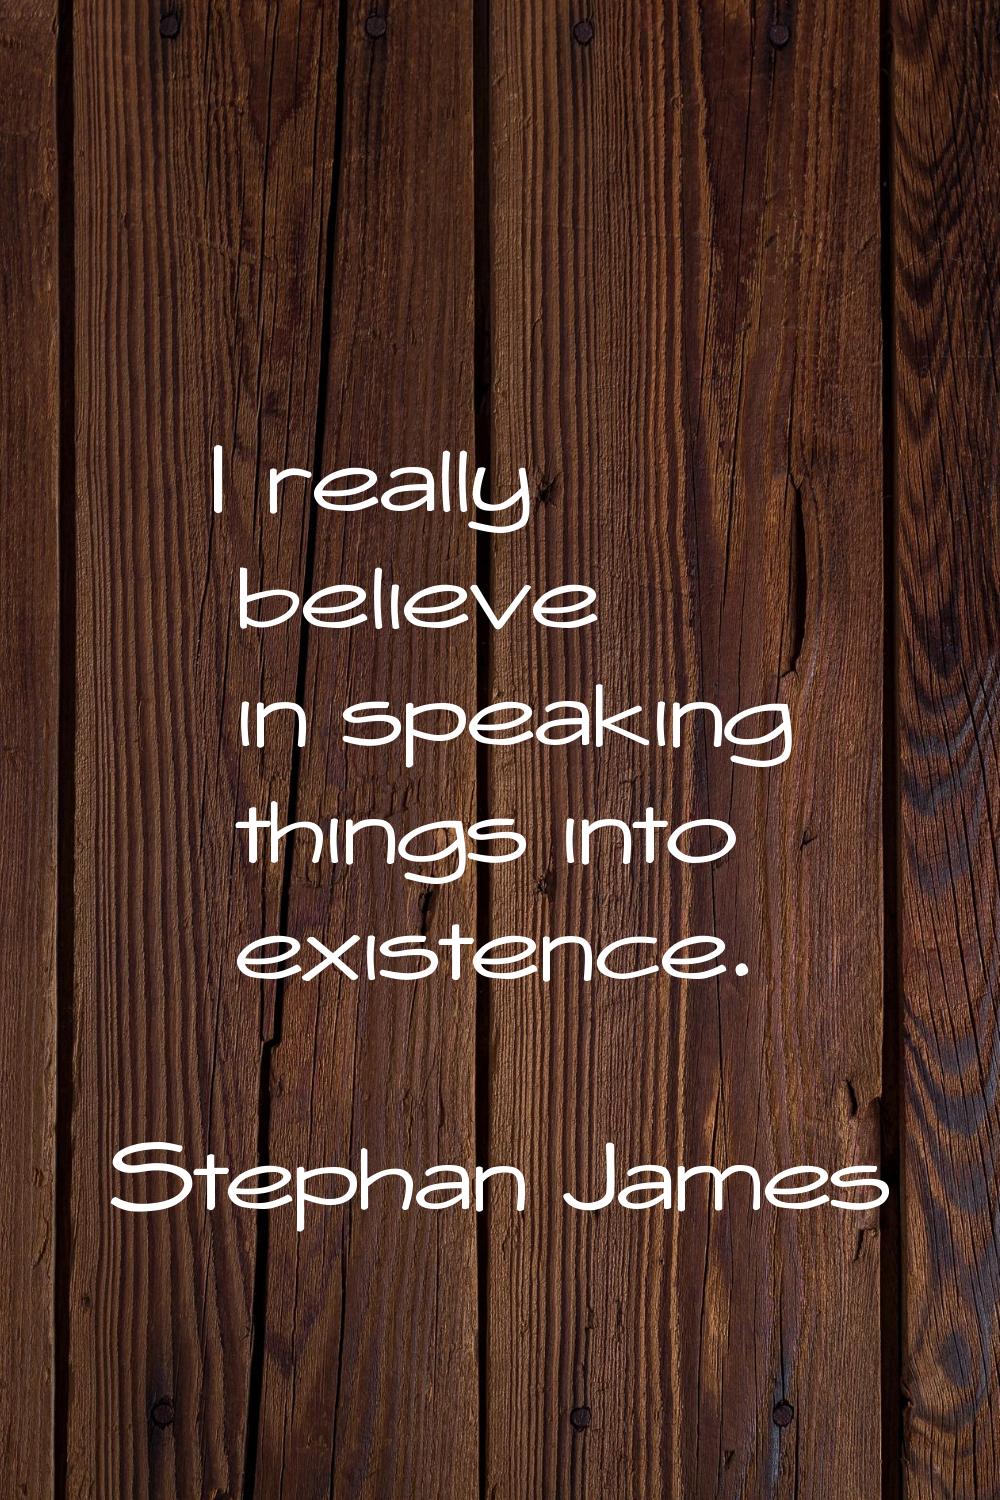 I really believe in speaking things into existence.